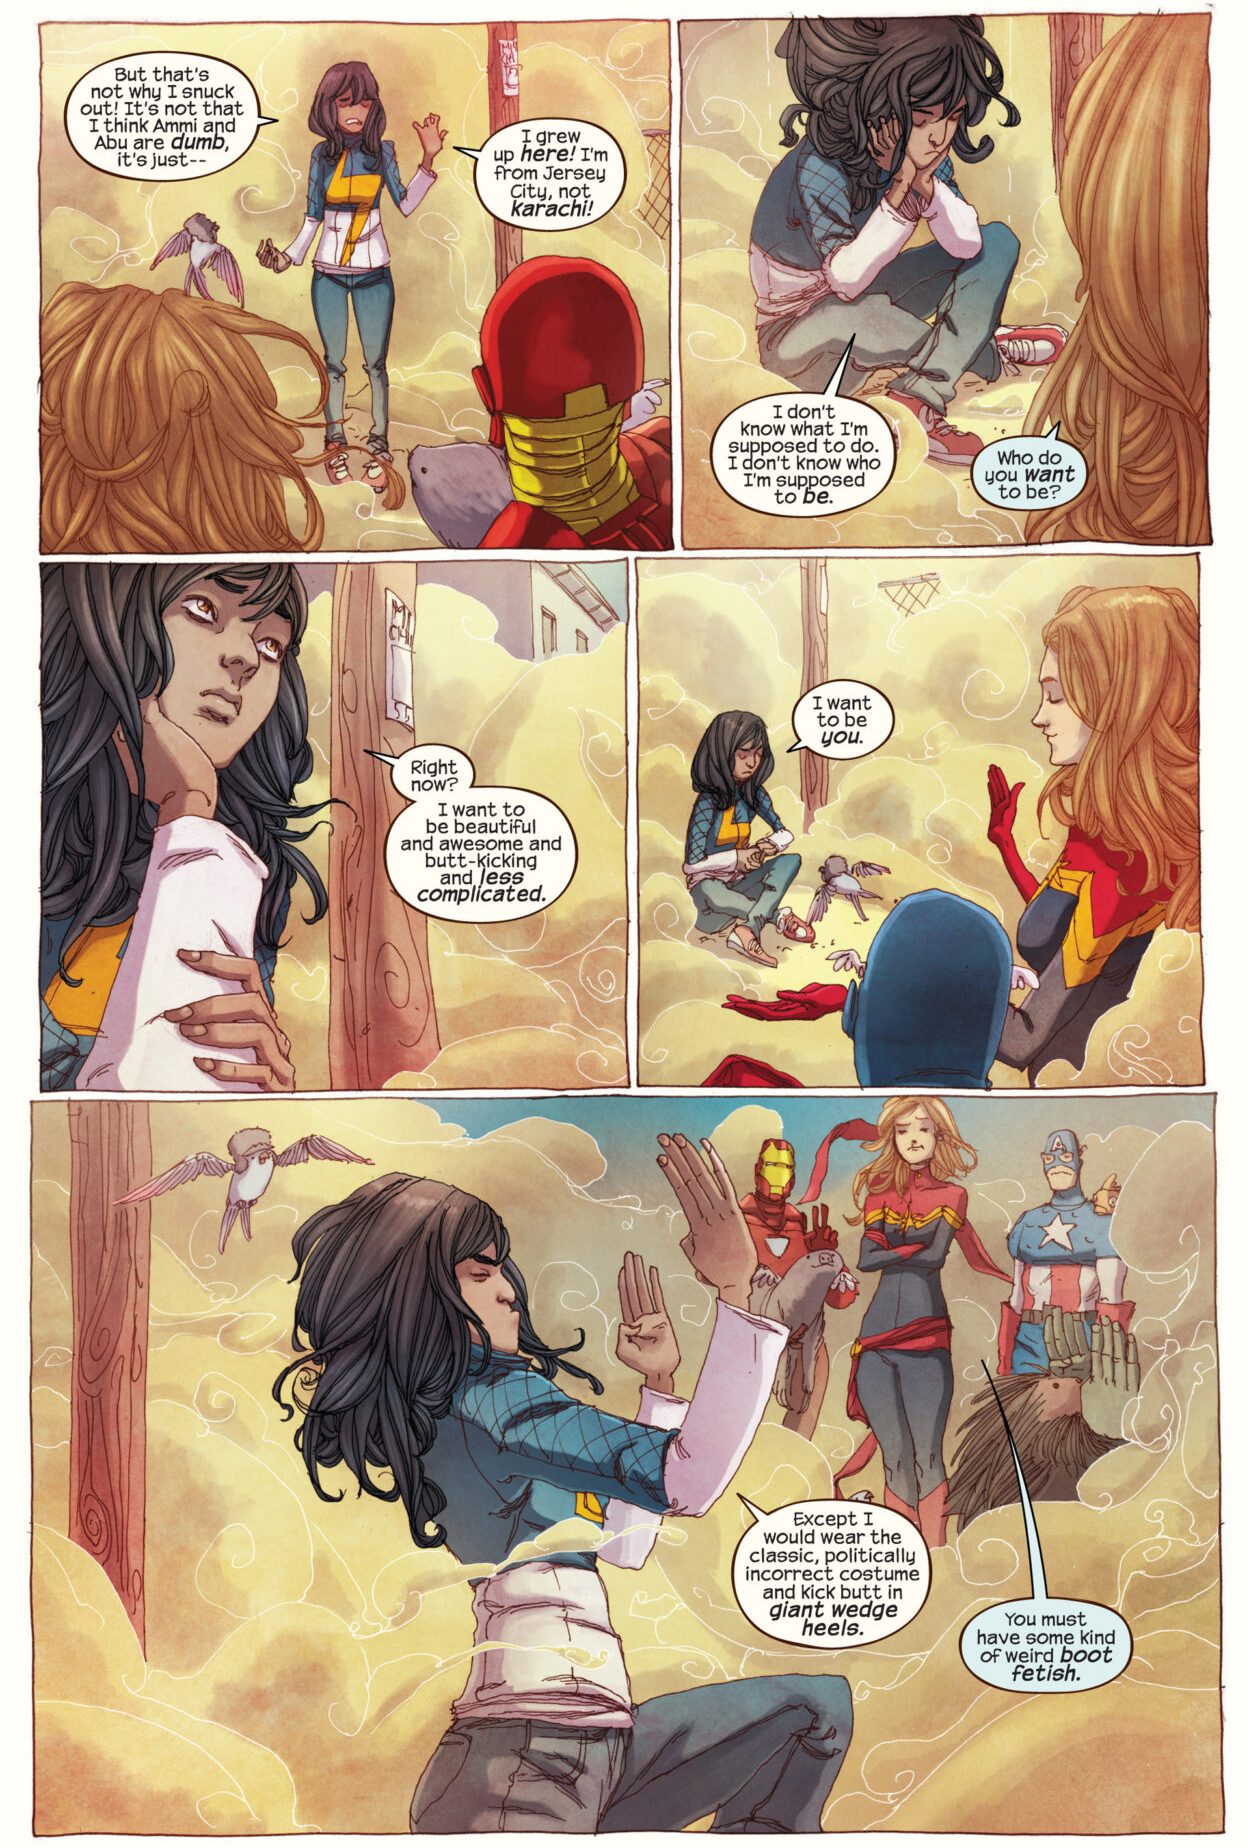 Kamala Khan is exposed to the Terrigen Mists in Ms. Marvel Vol. 3 #2 "No Normal. Part 2 of 5: All Mankind" (2014), Marvel Comics. Words by G. Willow Wilson, art by Adrian Alphona and Ian Herring.